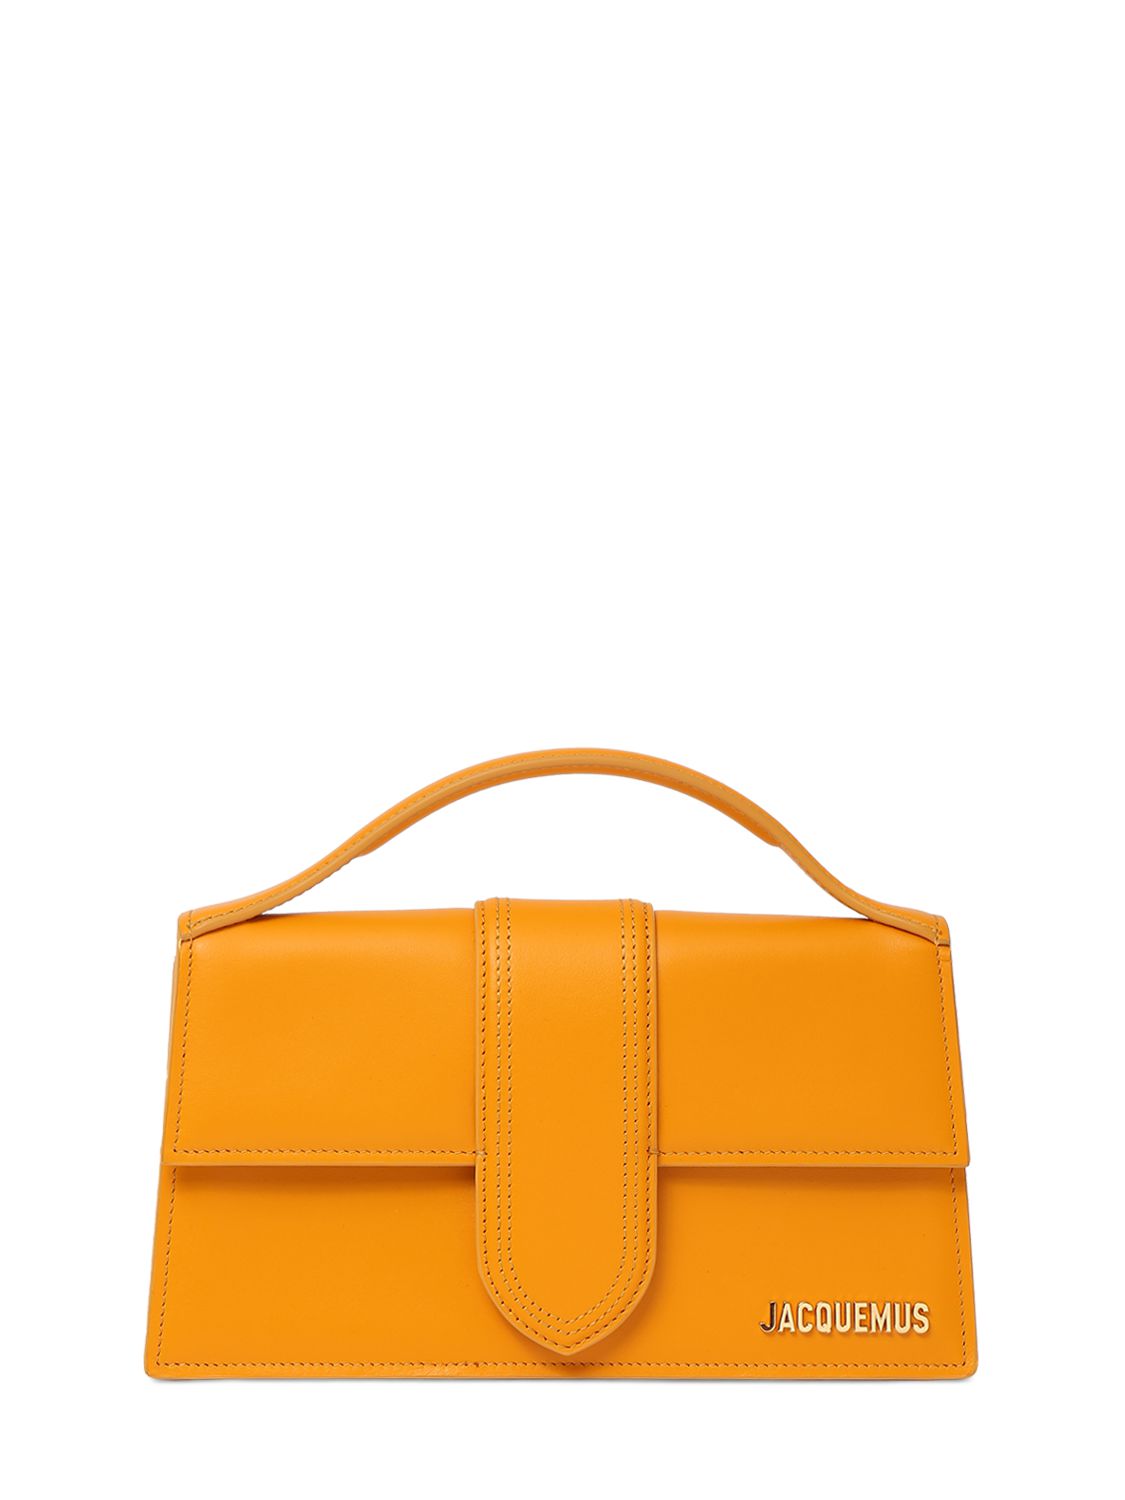 Jacquemus Le Grand Bambino Leather Top Handle Bag In Orange